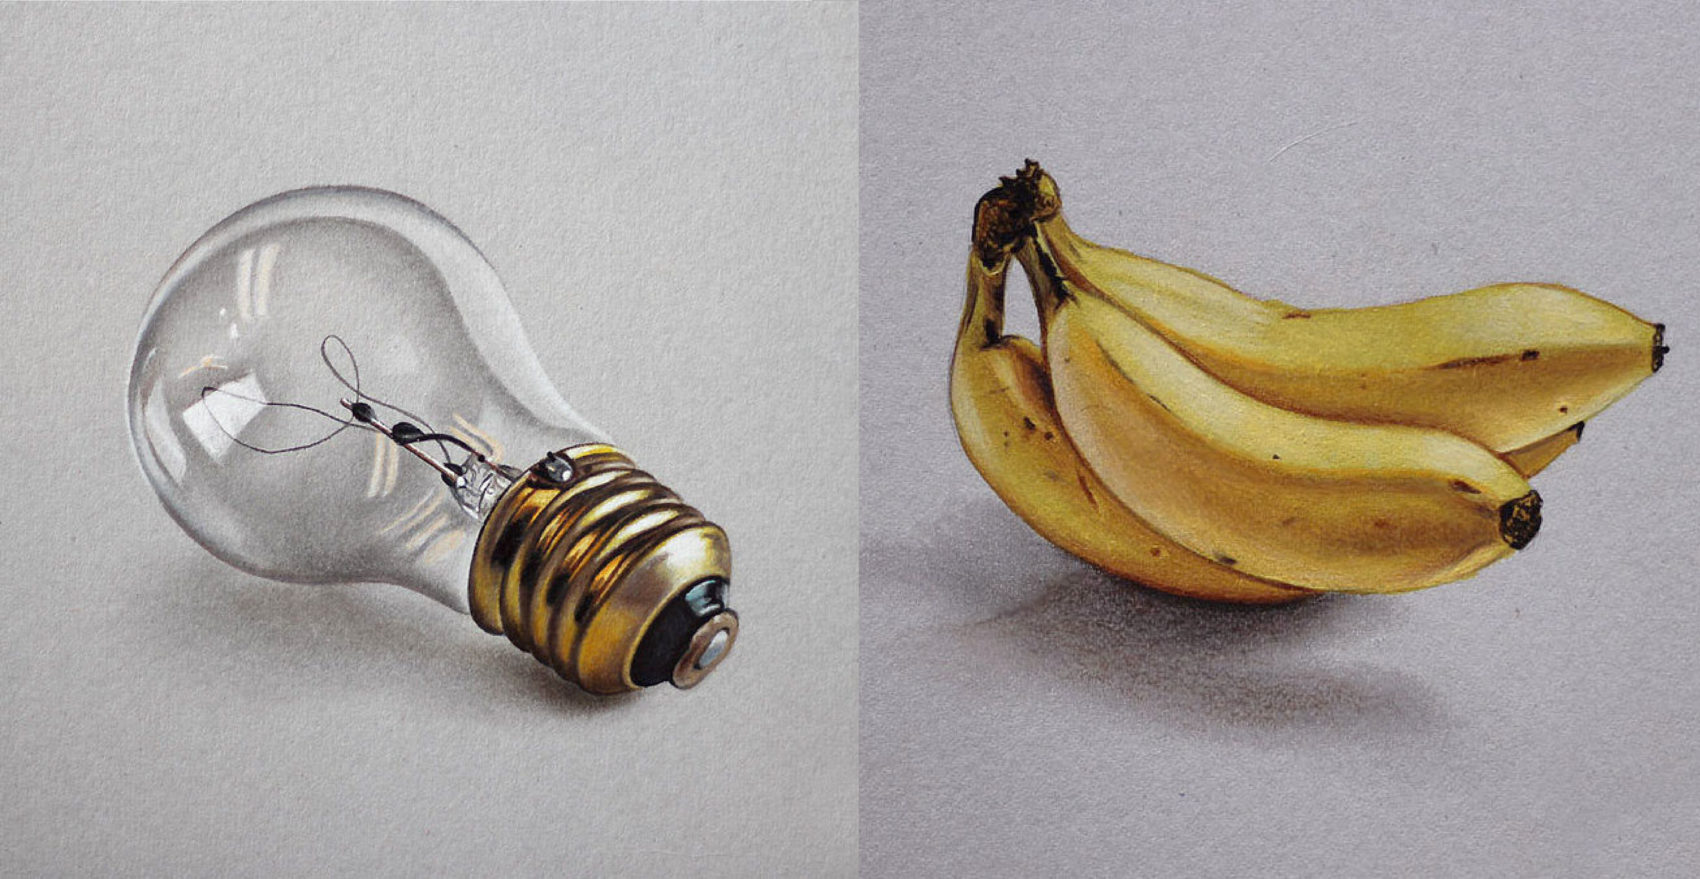 Photorealistic Color Pencil Drawings of Everyday Objects by Marcello  Barengi | 99inspiration